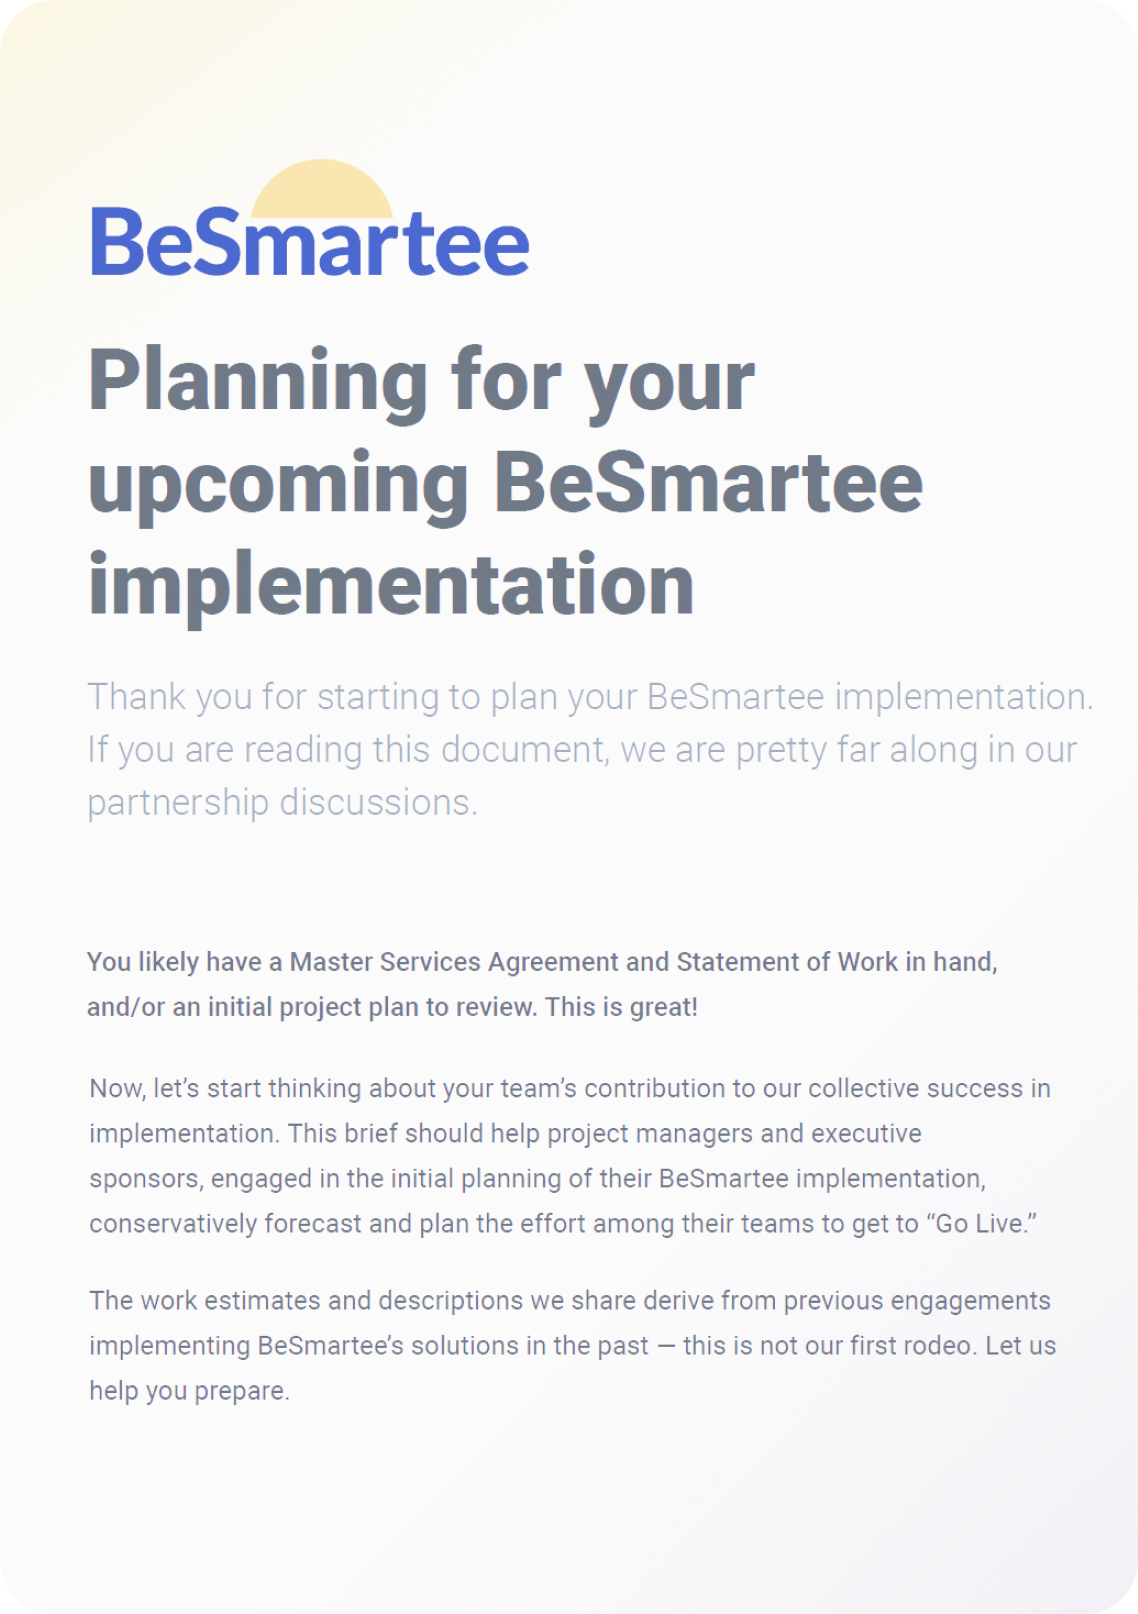 Planning for your upcoming BeSmartee implementation